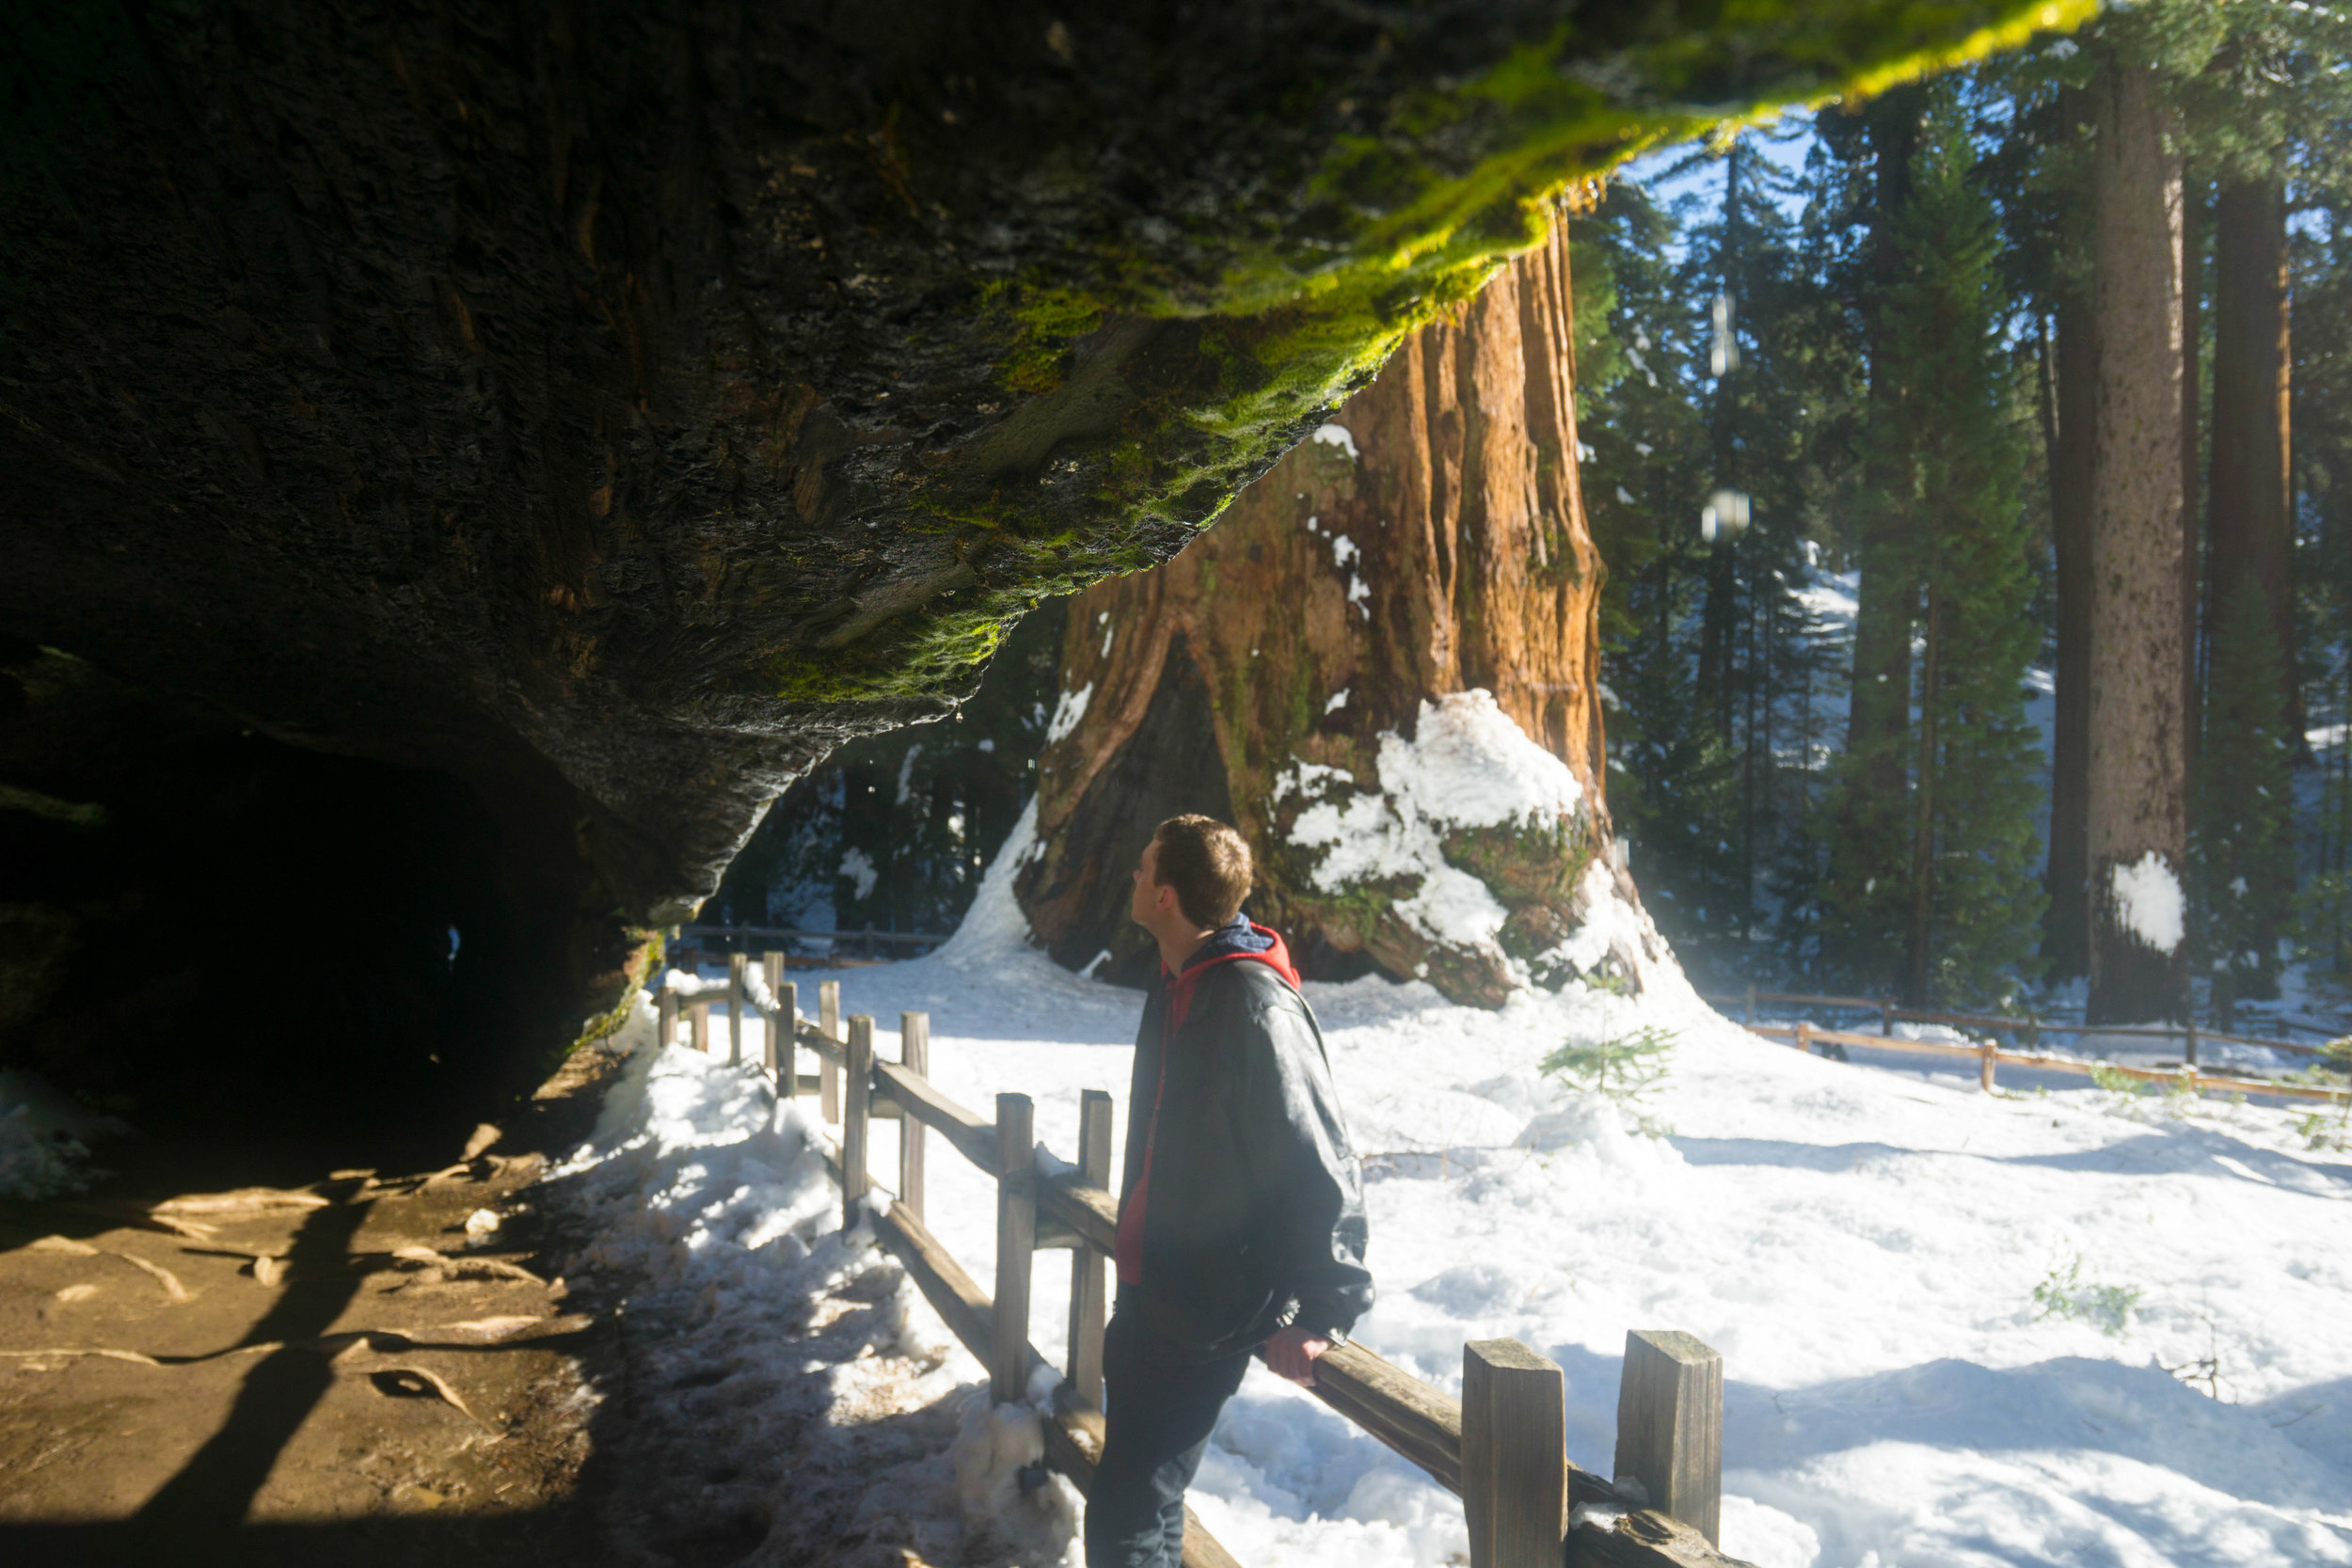 The Mark Twain tree is so large in fact, that it acts as a tunnel through Grant Grove.